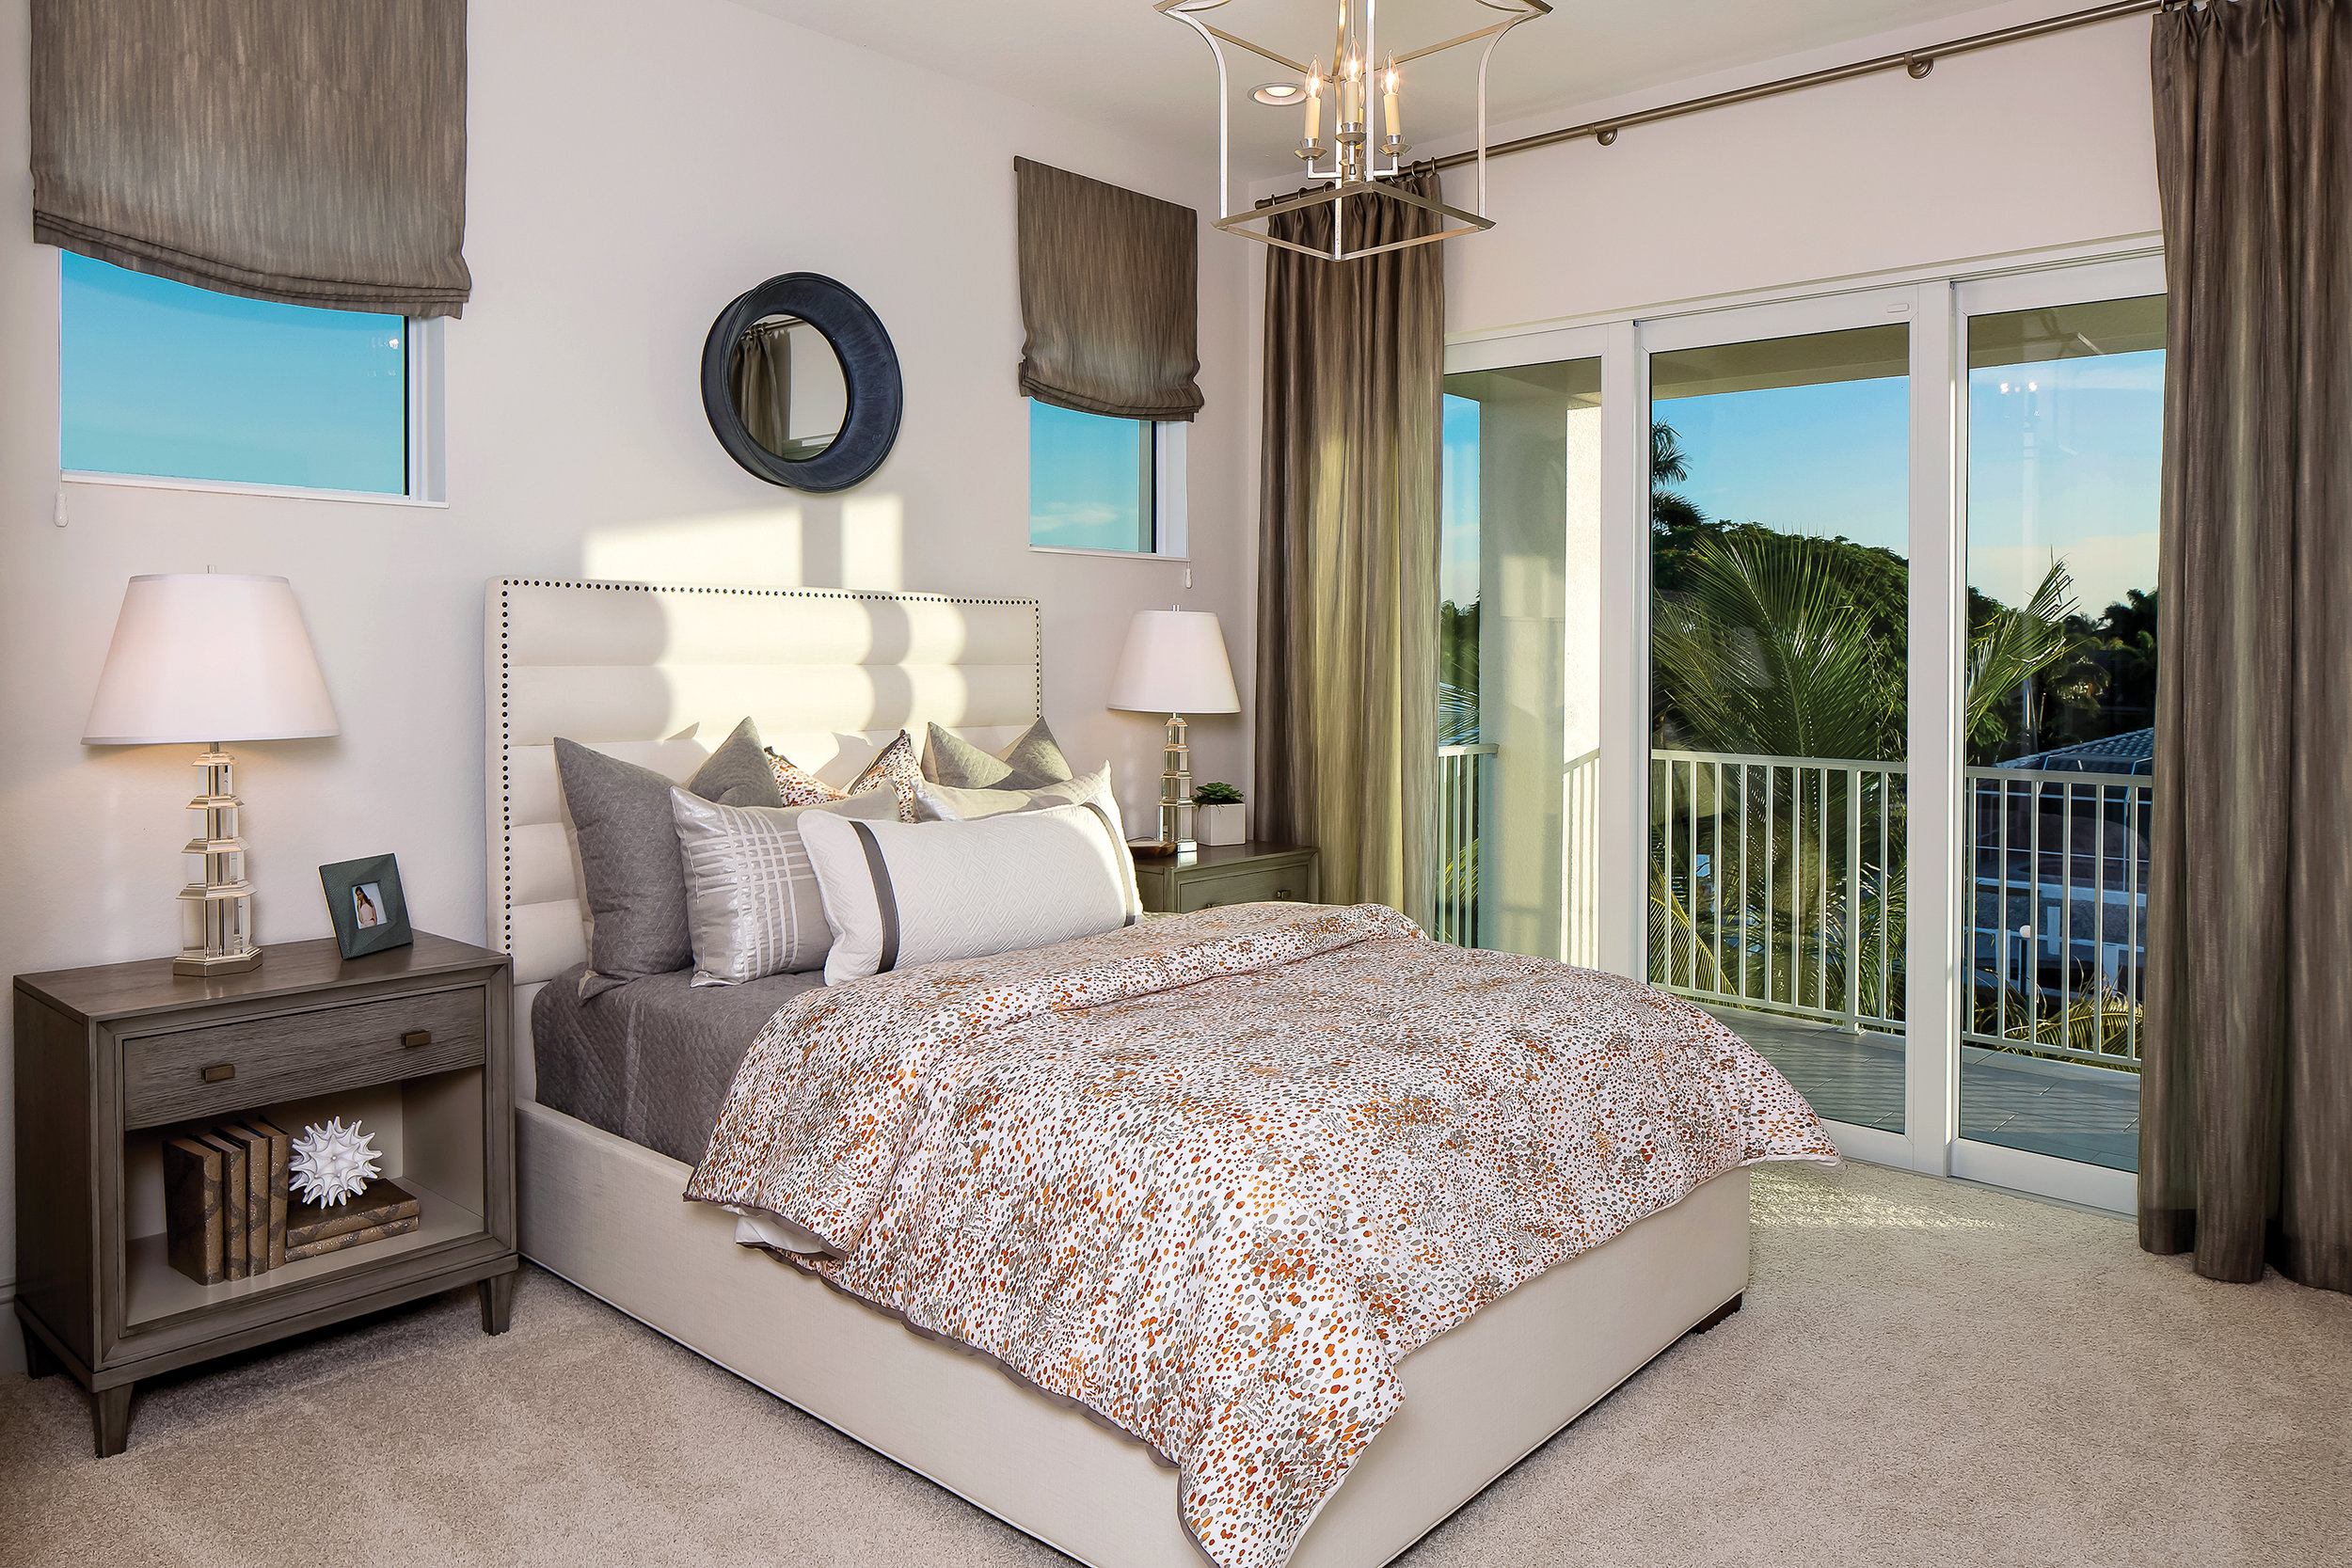  On the second floor, one of two guest bedrooms provides a private space away from the main living areas and the master bedroom. This is perfect for guests or children who are a little older and want their own area in the home. The modern duvet is a 